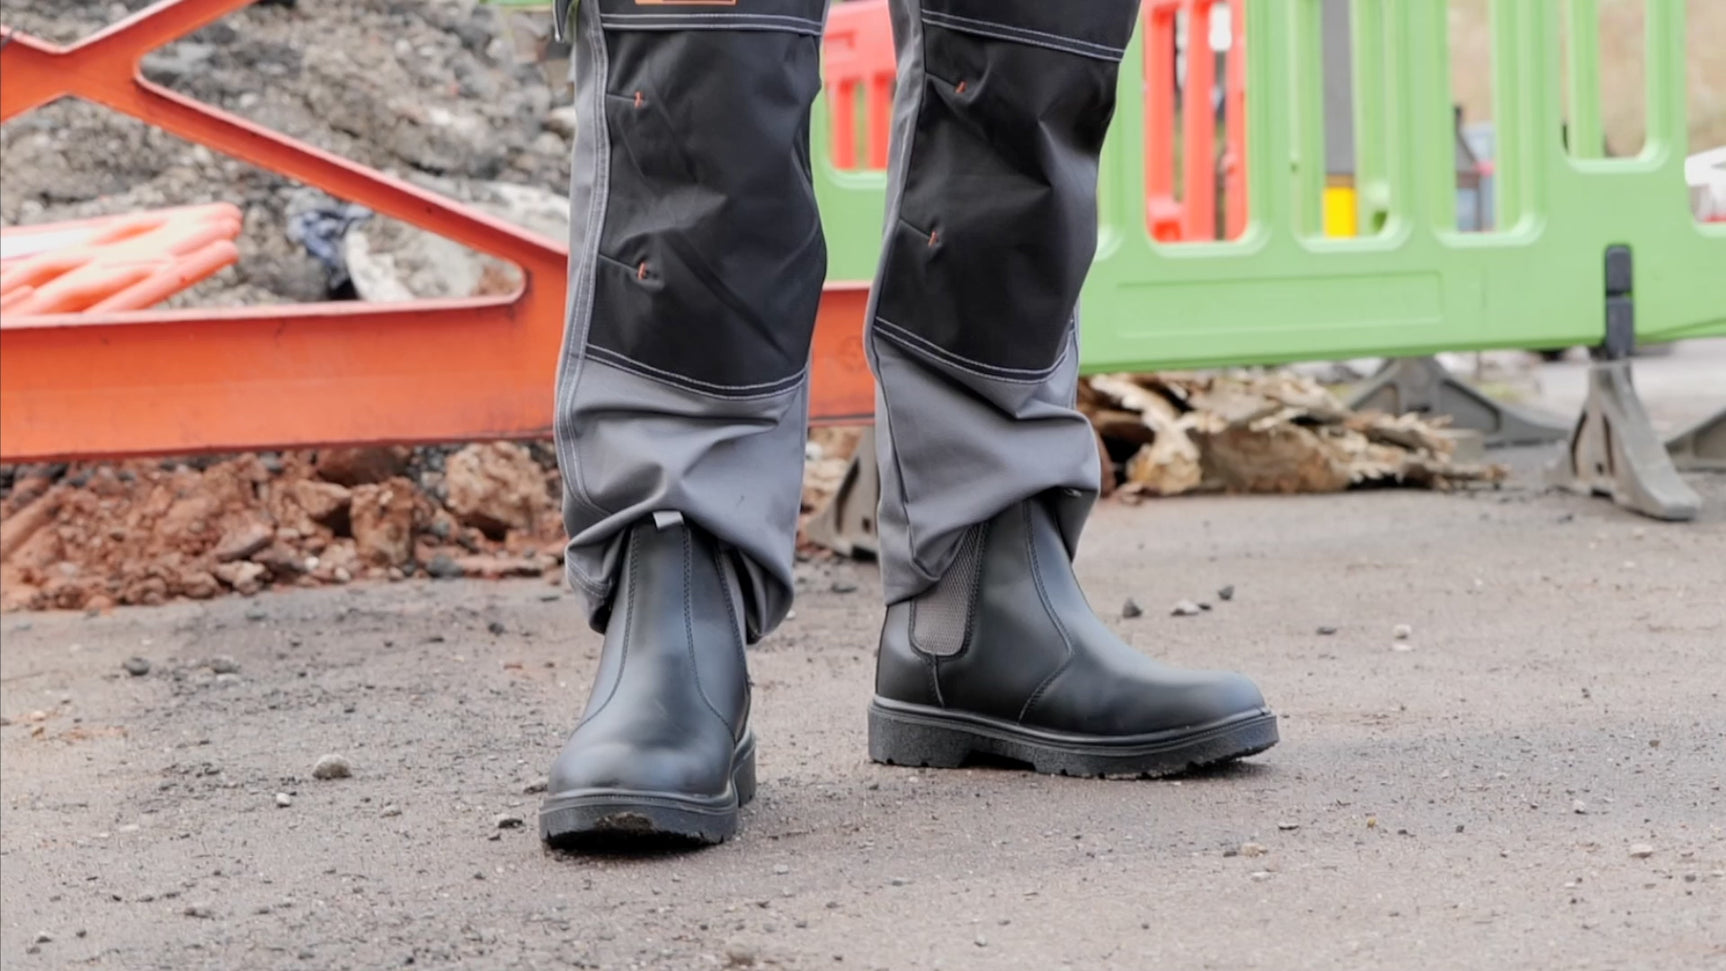 Slip on safety boots